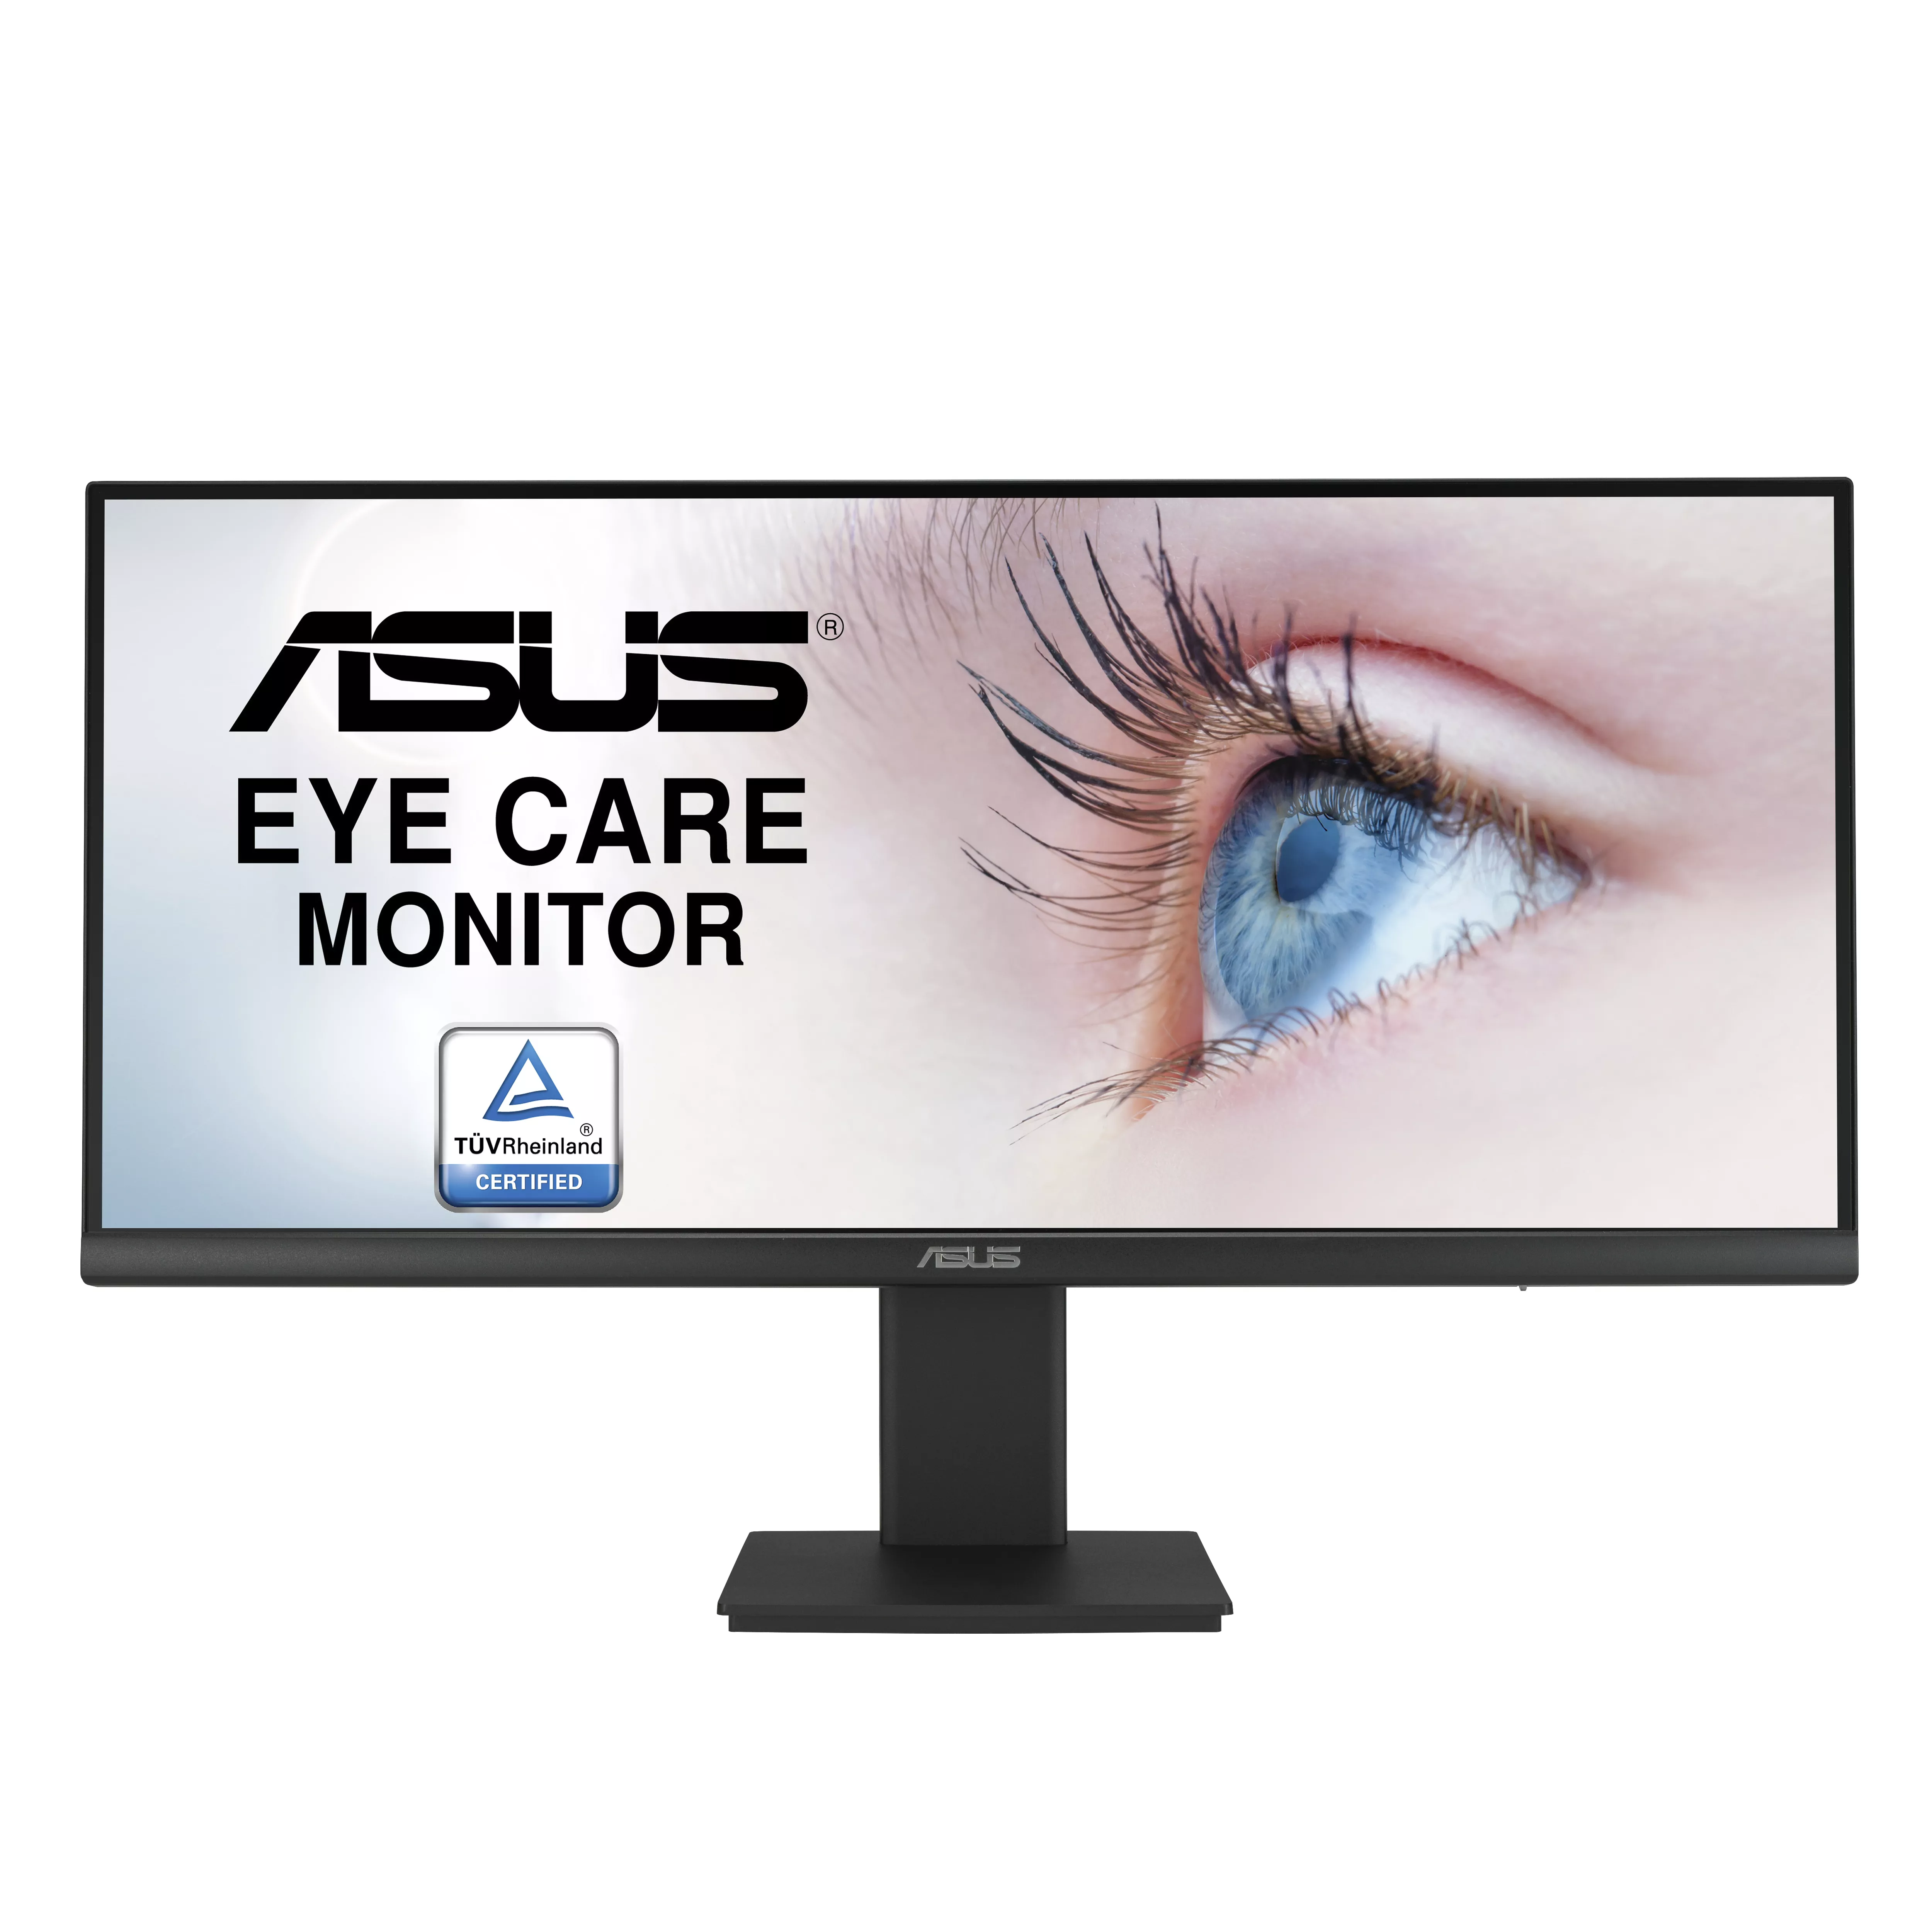 Achat ASUS VP299CL Eye Care Monitor 29p 21:9 Ultra-wide FHD sur hello RSE